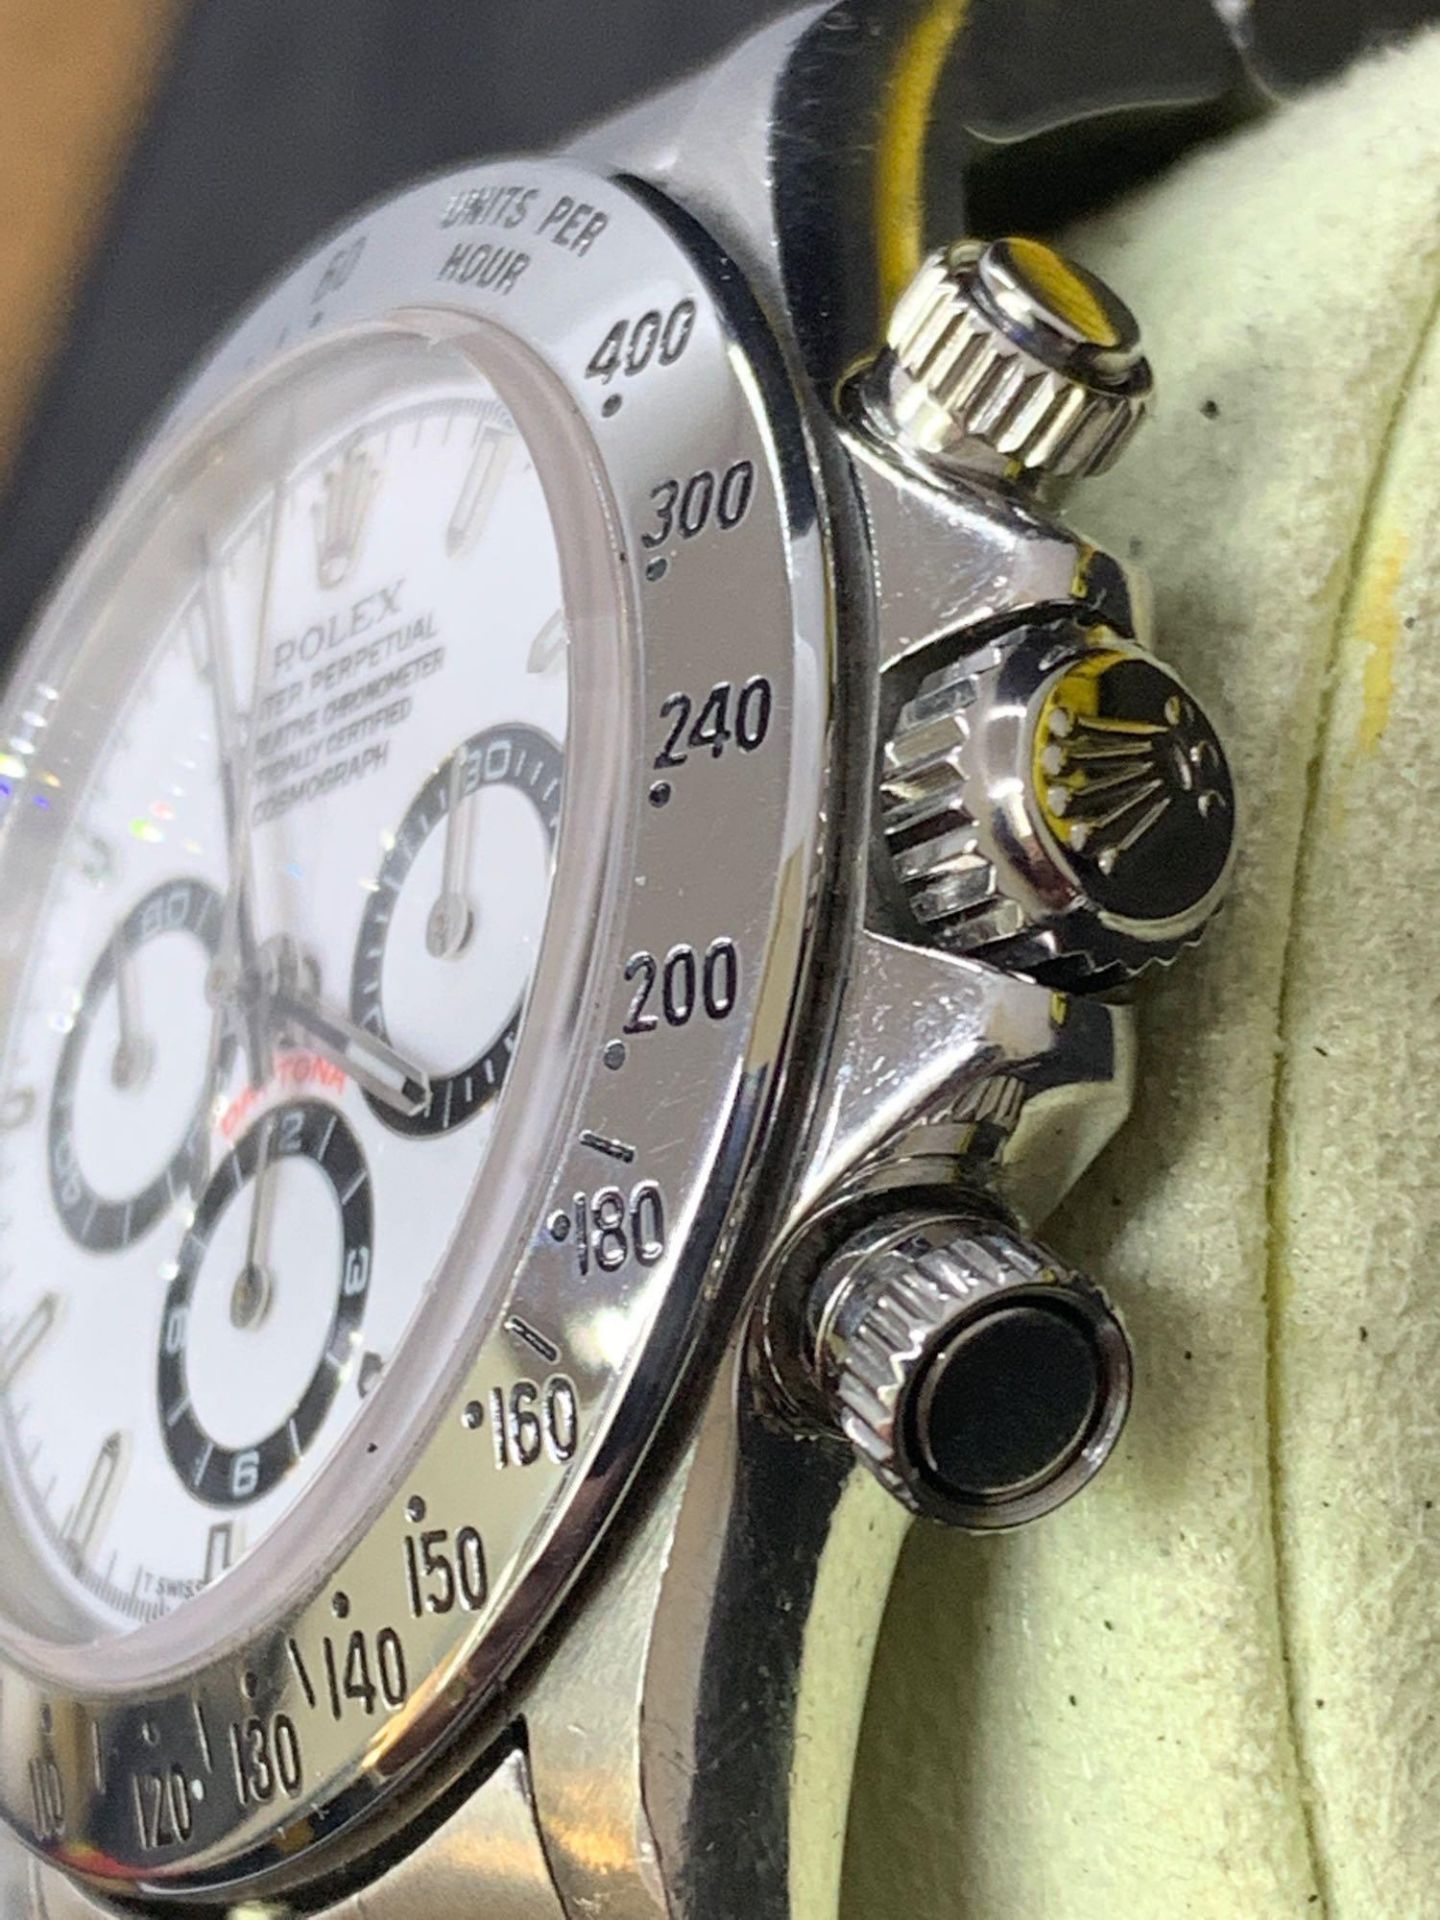 Rolex Daytona chronograph stainless steel watch We believe Dial and chrono pushers maybe aftermarket - Image 2 of 15